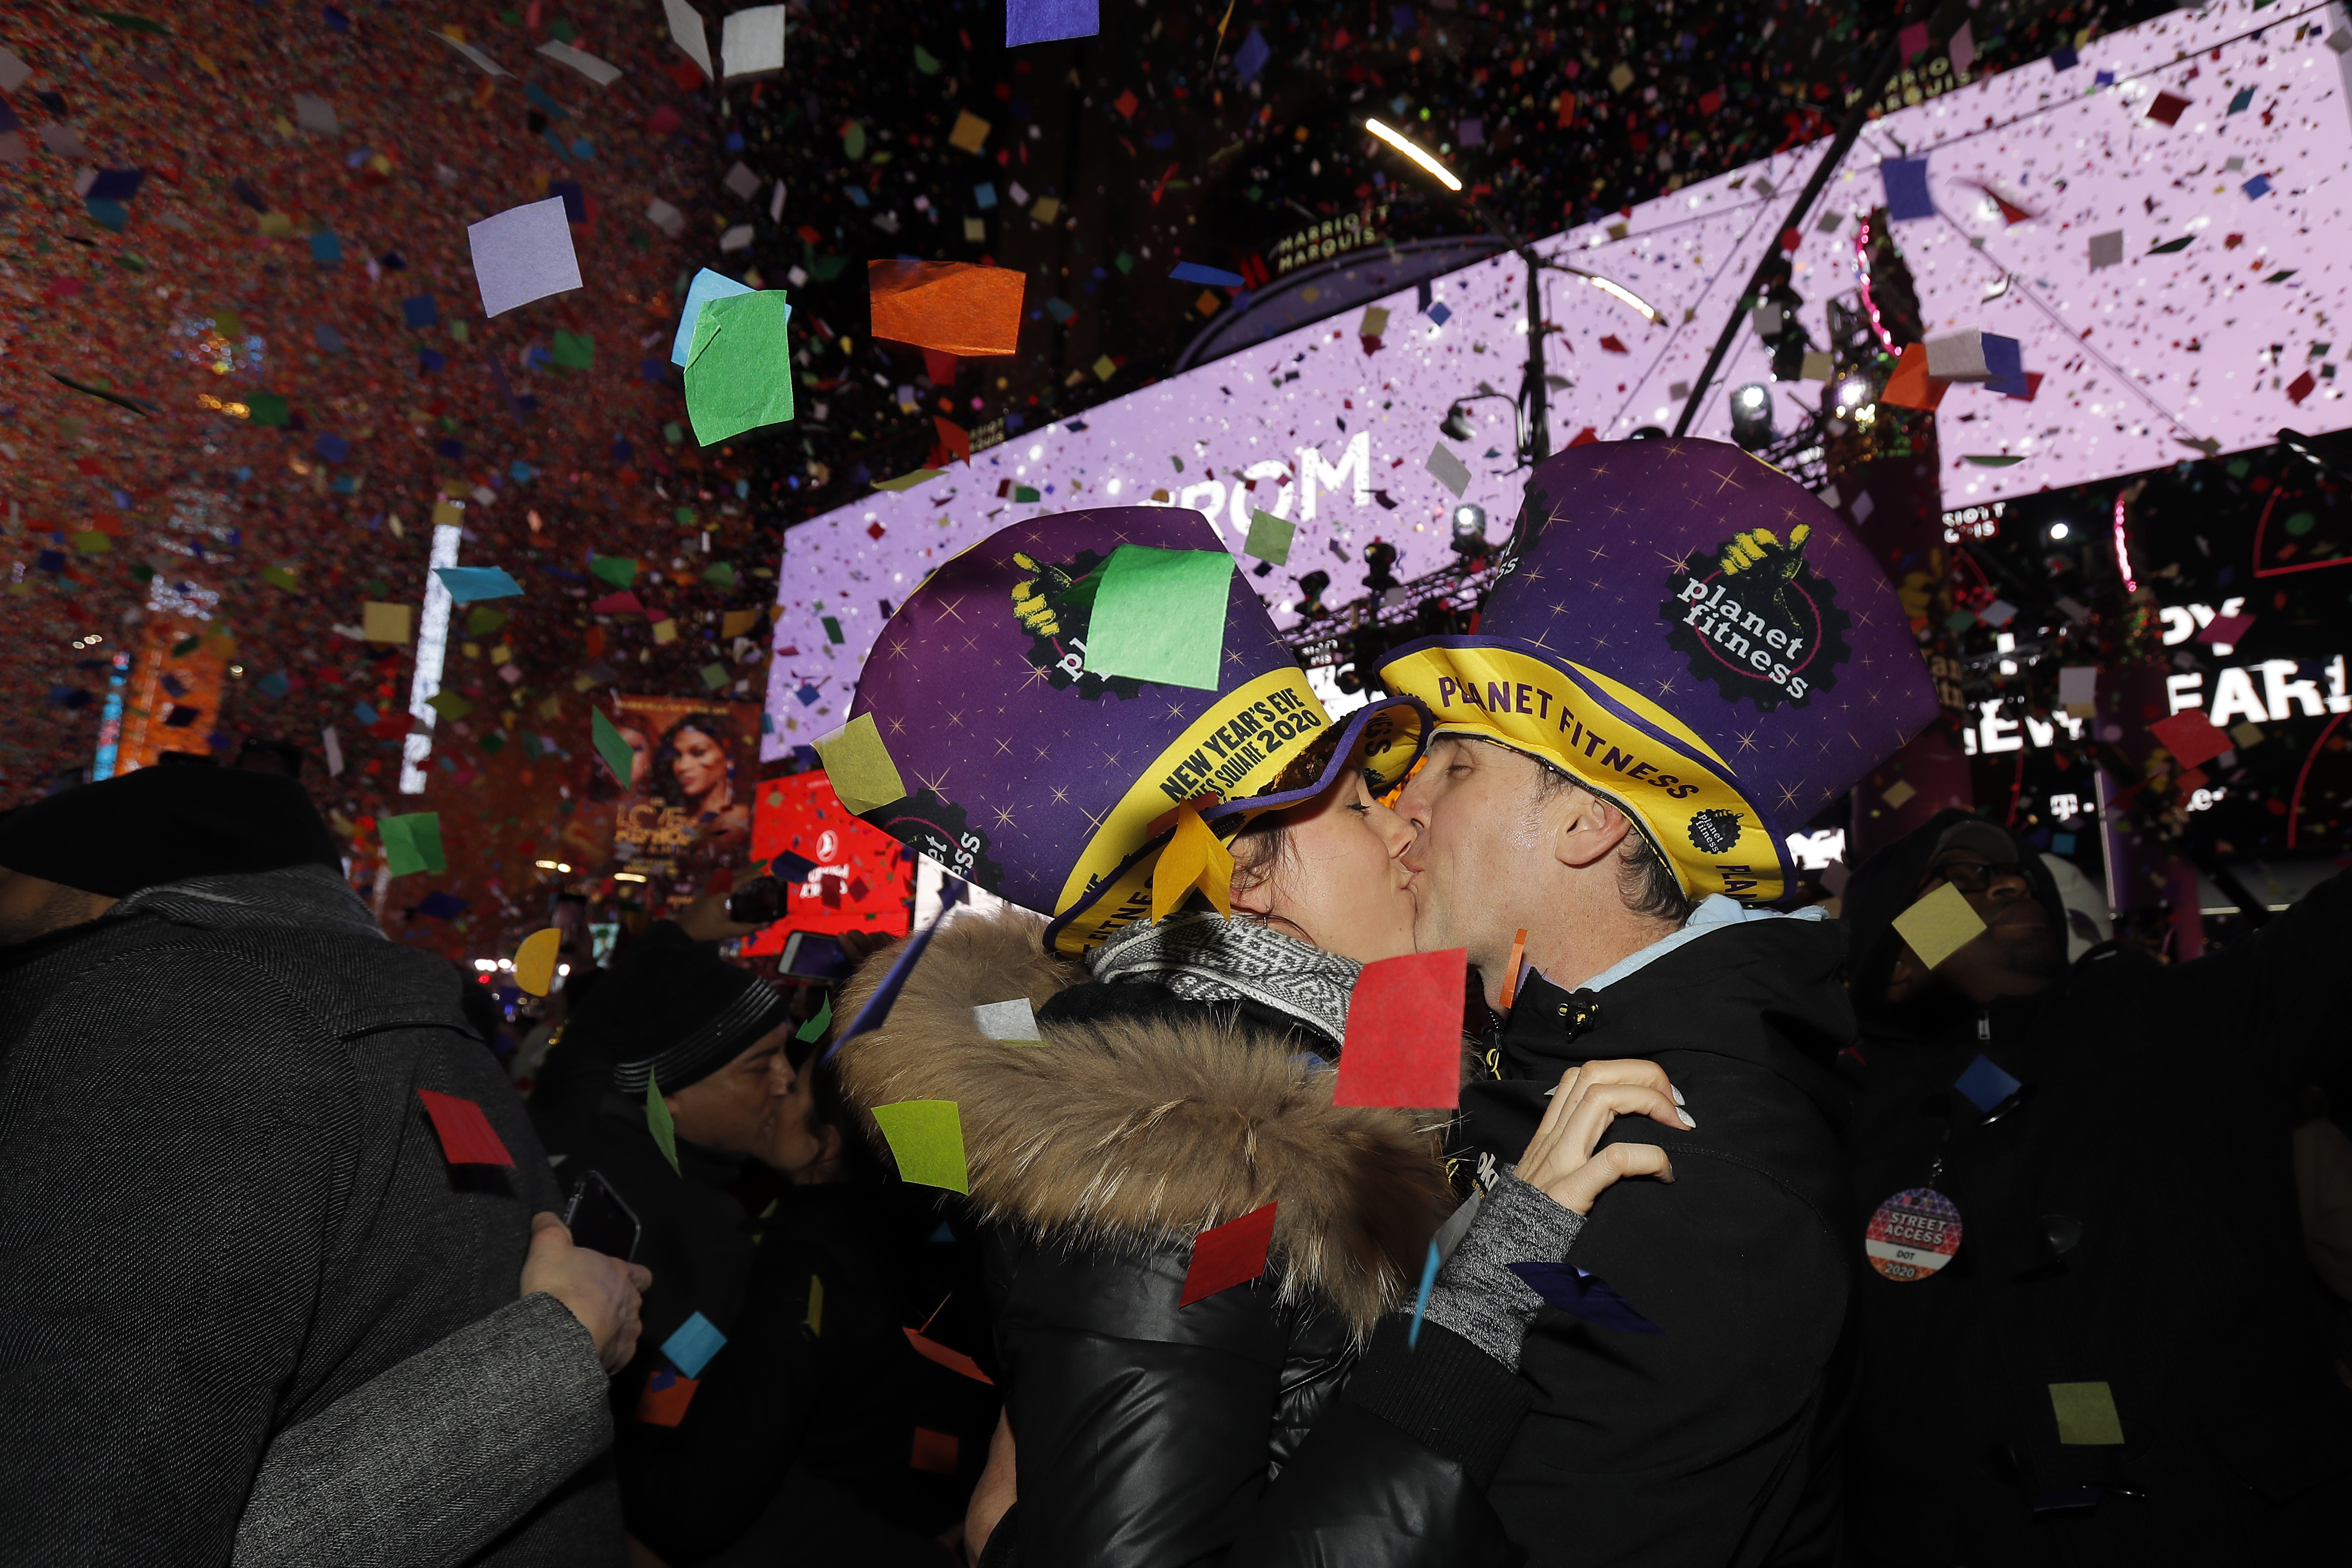 Sandra Desjardins kisses Jean-Charles Goulet both of Montreal, Canada, during a New Year's celebration in New York's Times Square, Wednesday, Jan. 1, 2020. (AP Photo/Adam Hunger)